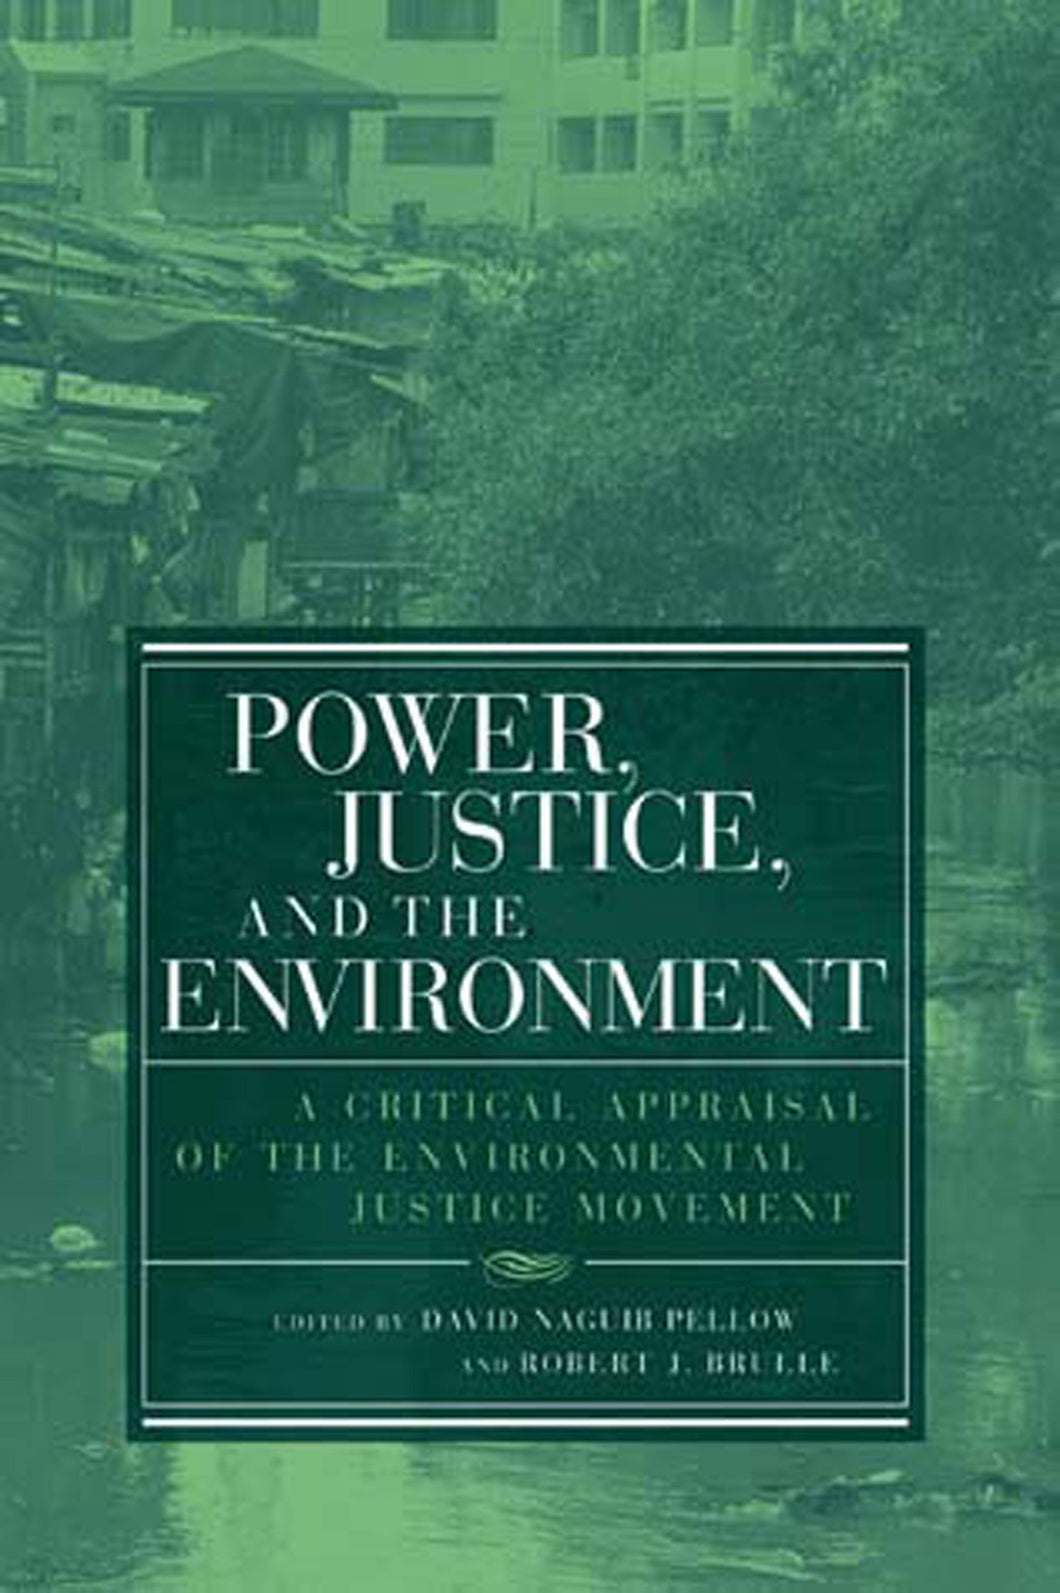 Power, Justice, and the Environment: A Critical Appraisal of the Environmental Justice Movement